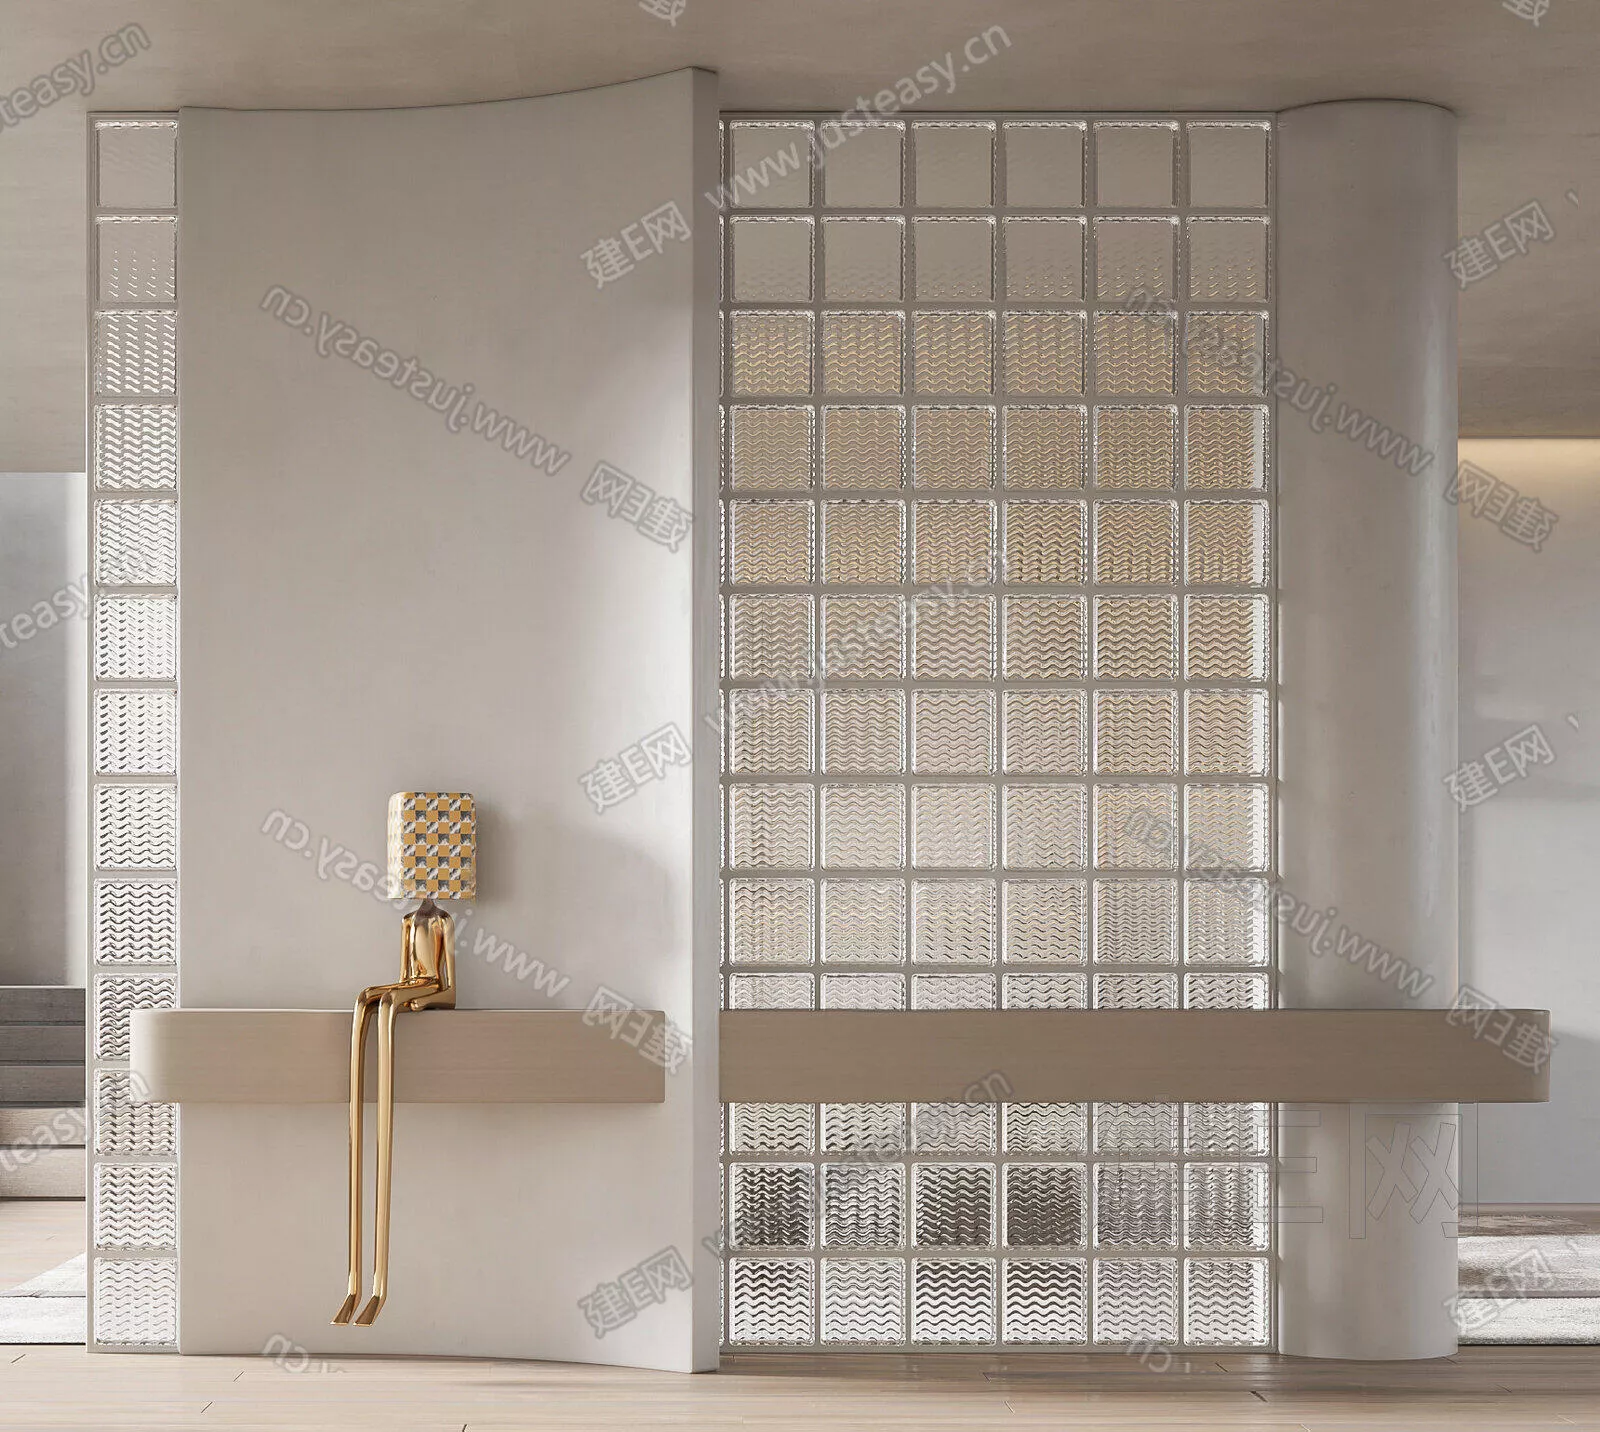 MODERN PARTITION SCREEN - SKETCHUP 3D MODEL - VRAY - 115033179